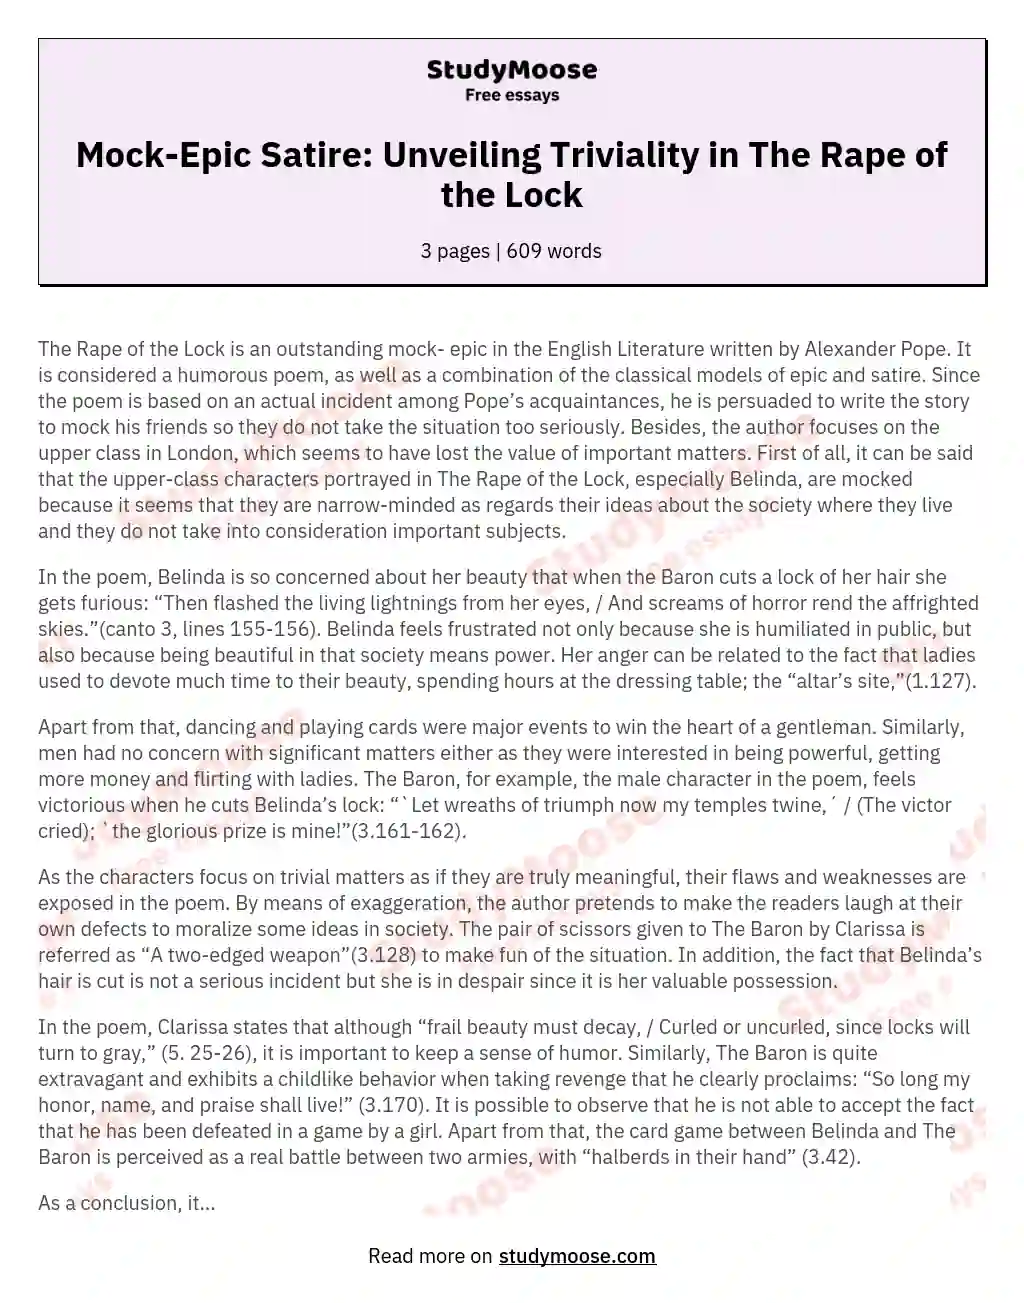 Mock-Epic Satire: Unveiling Triviality in The Rape of the Lock essay